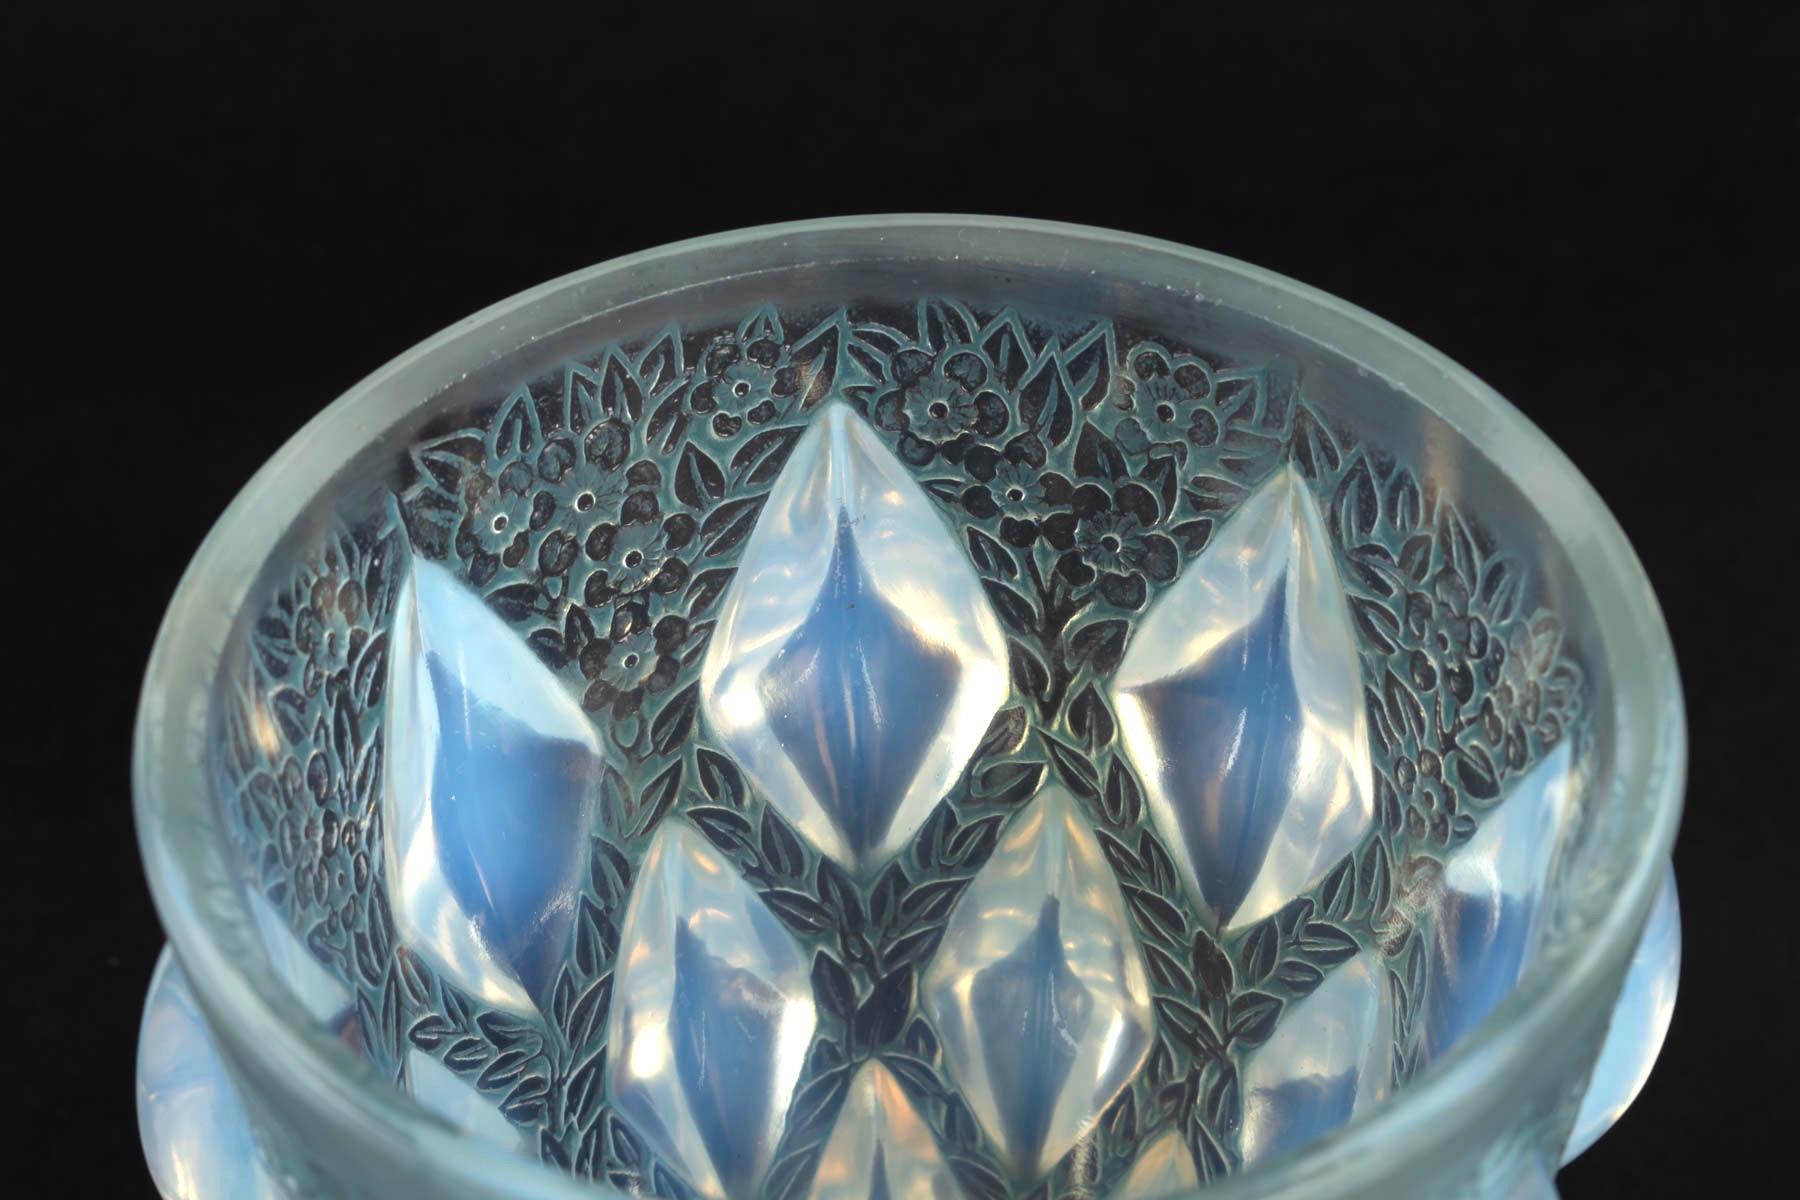 Art Deco 1927 René Lalique Rampillon Vase in Opalescent Glass with Blue-Green Patina